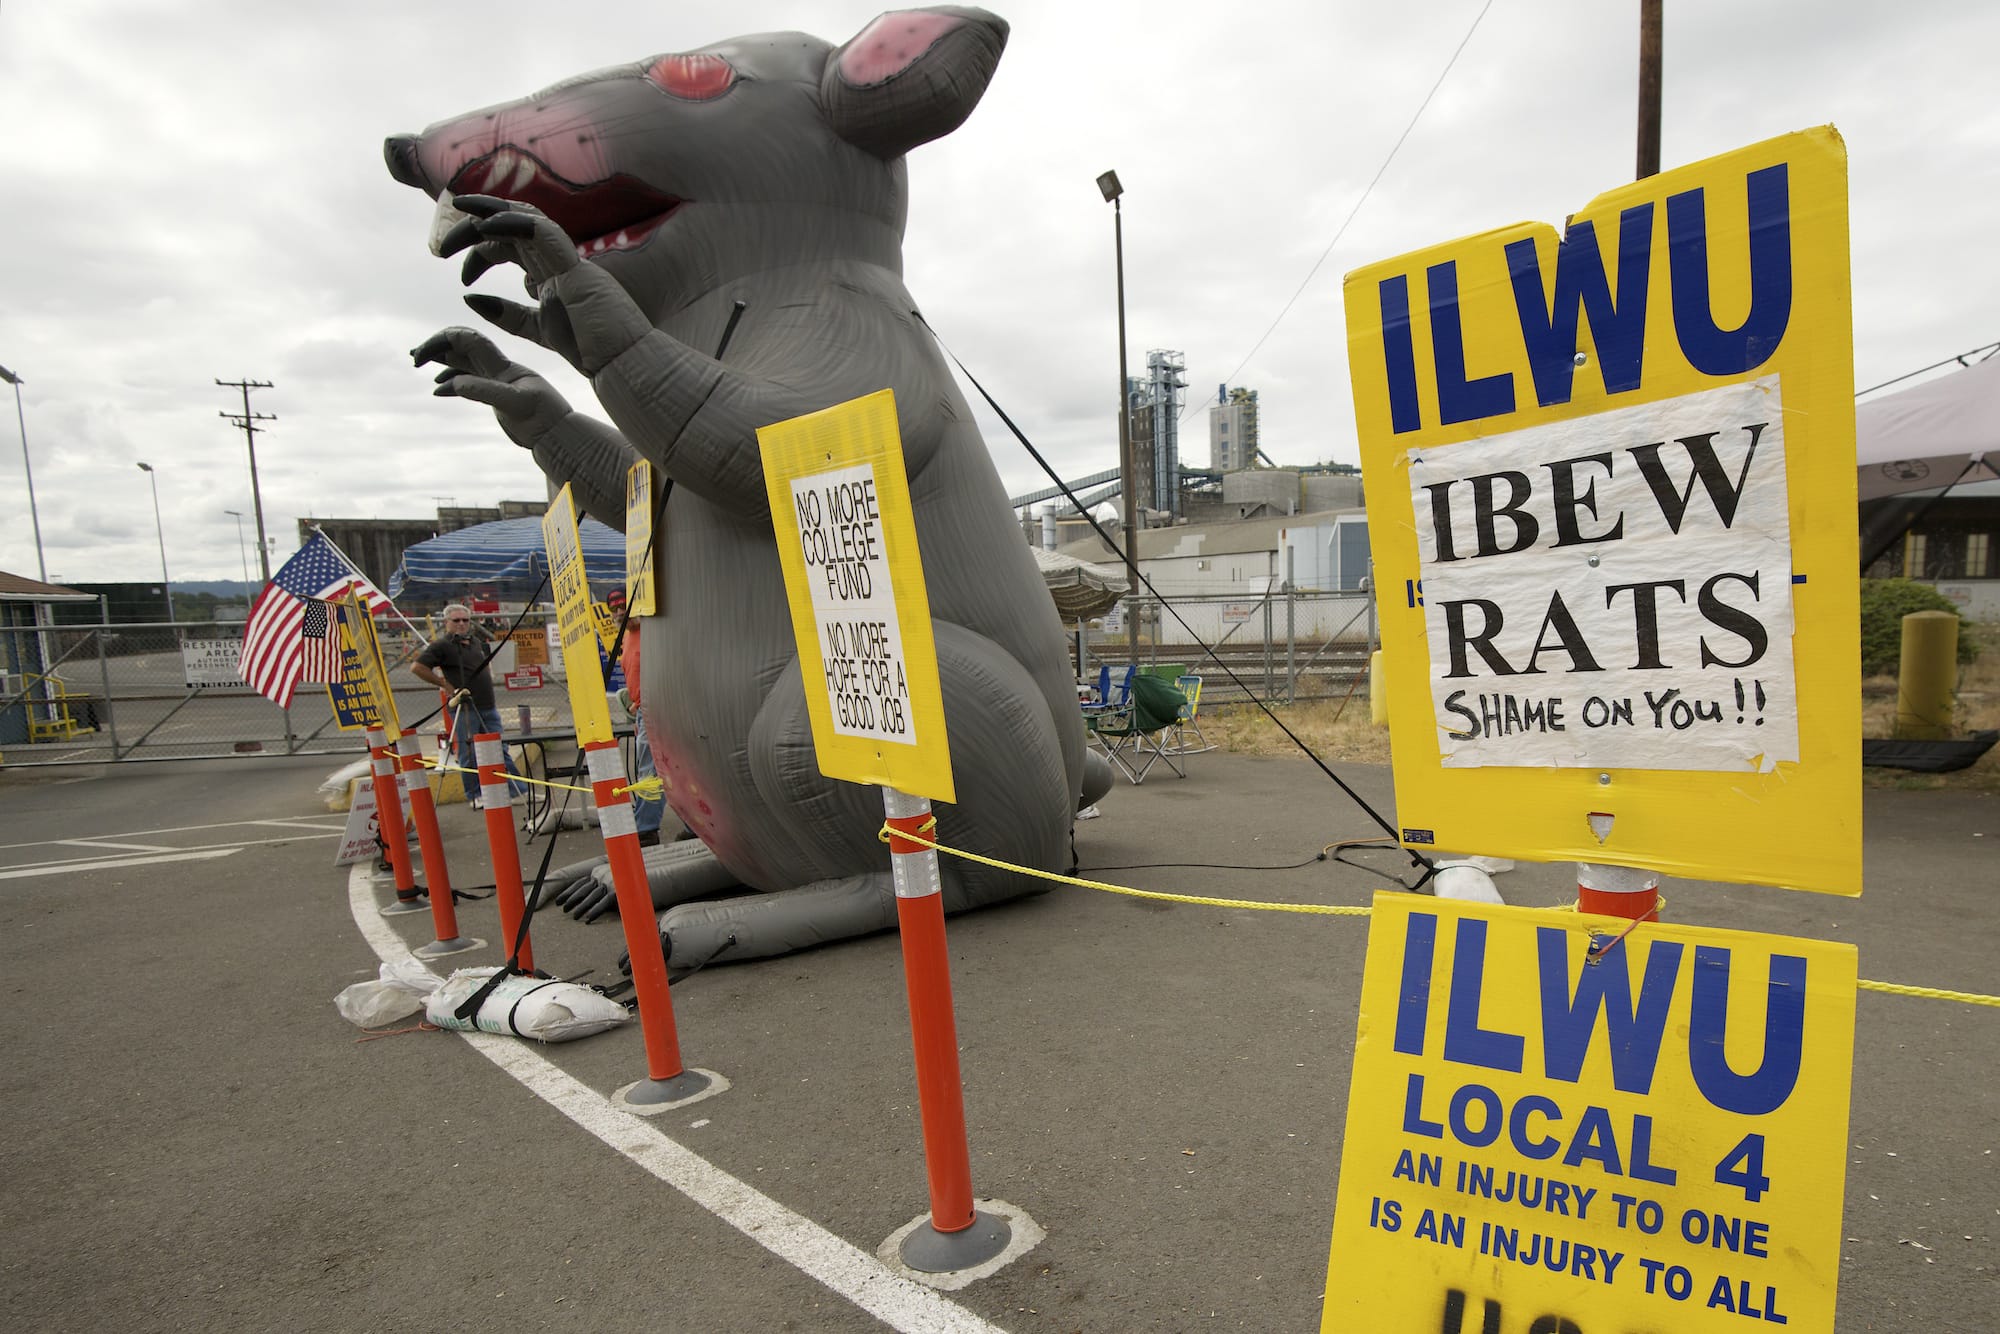 Late July or early August 2013: Union dockworkers introduce a new prop in their protest against United Grain: a 12-foot-tall inflatable rat.